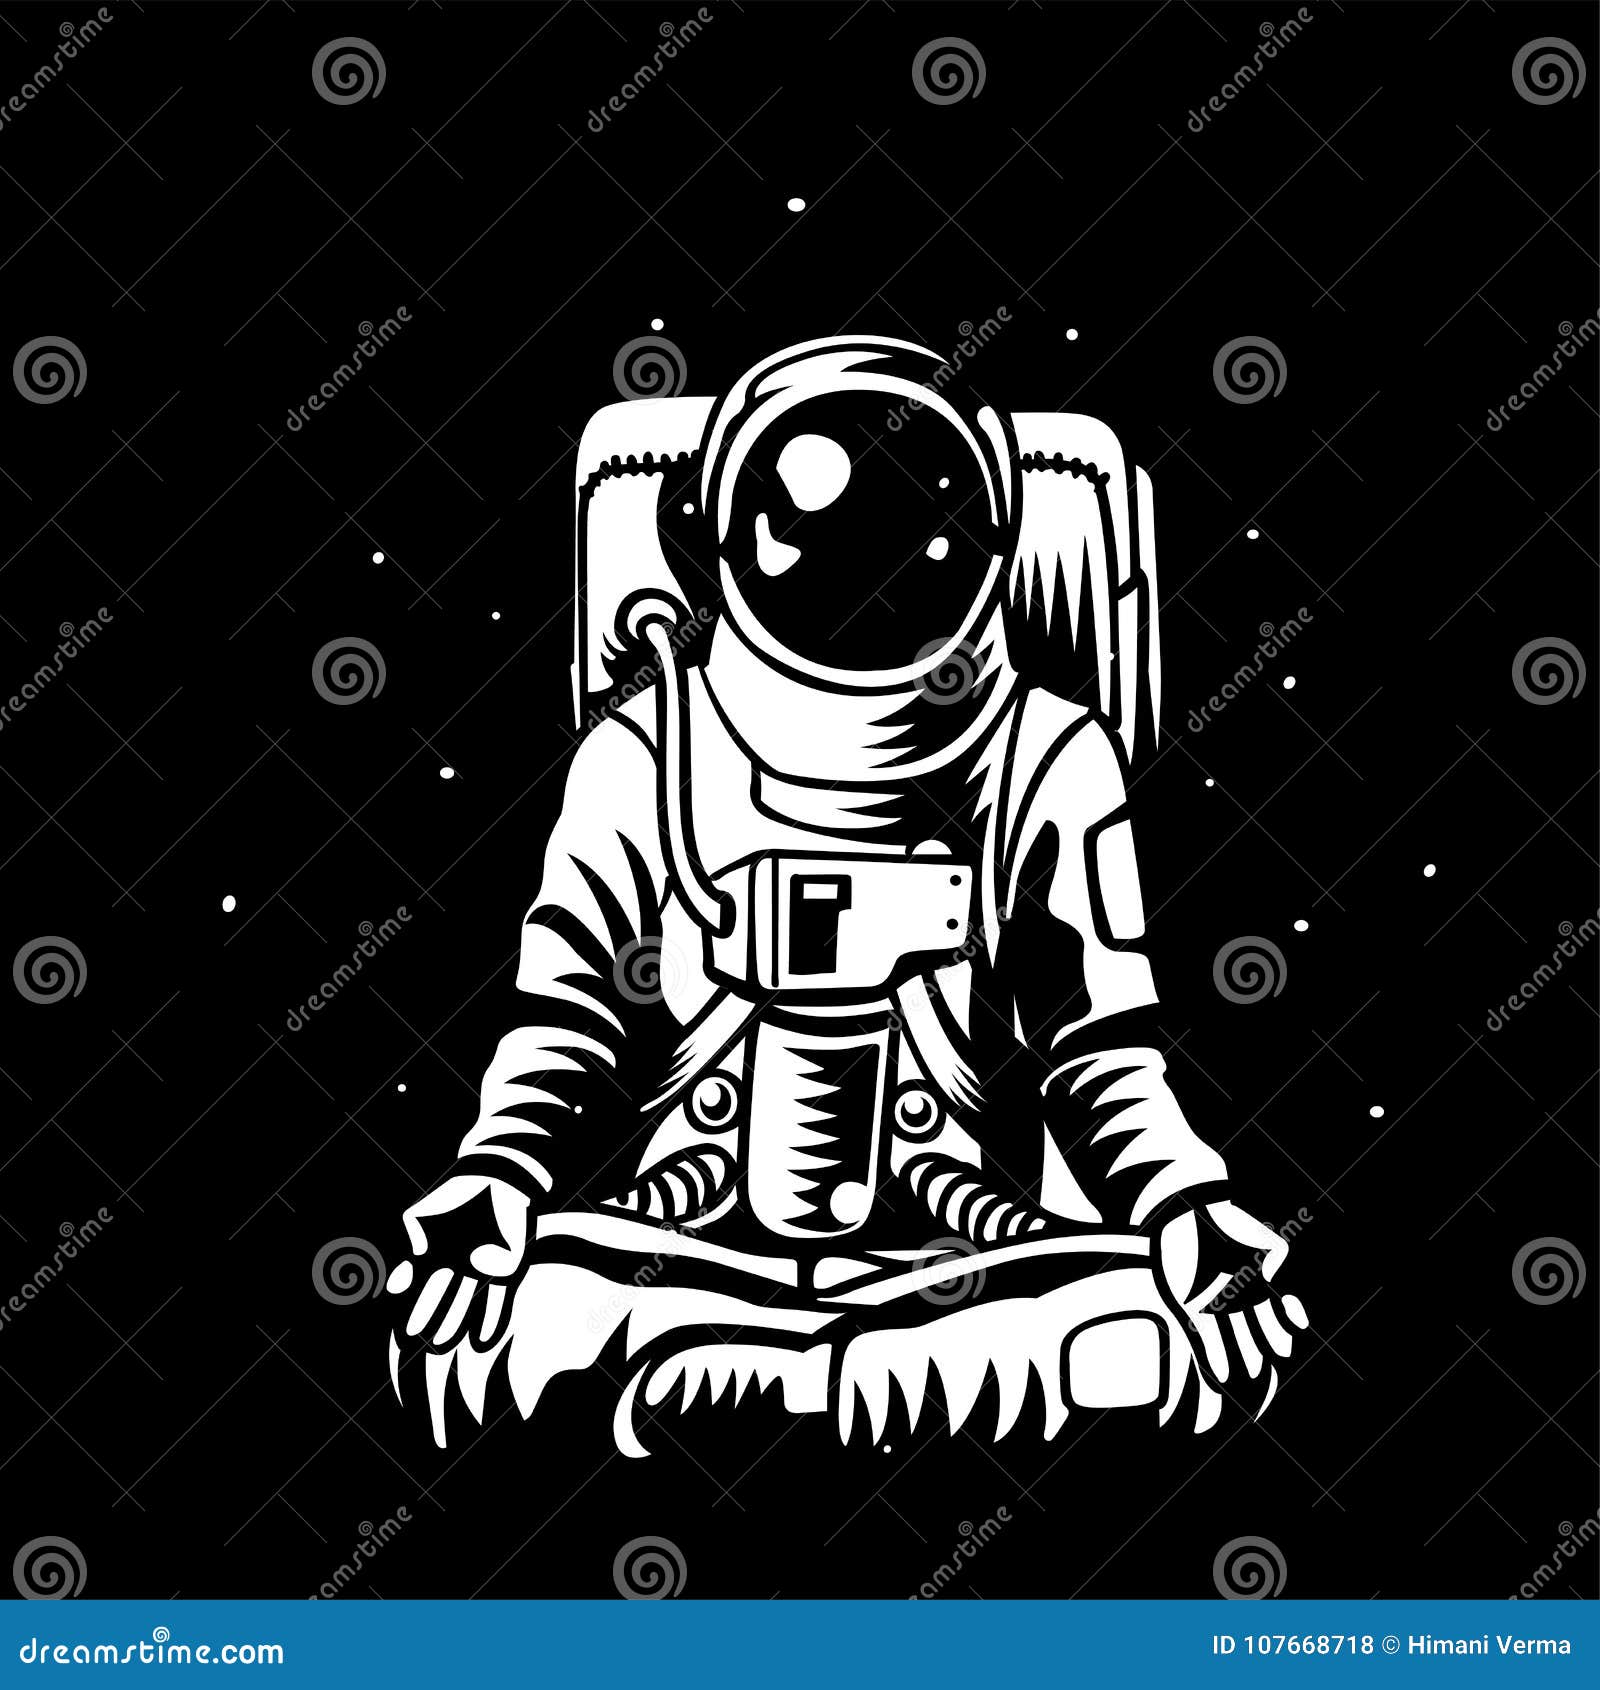 Spaceman in pressure suit out space among stars Vector Image